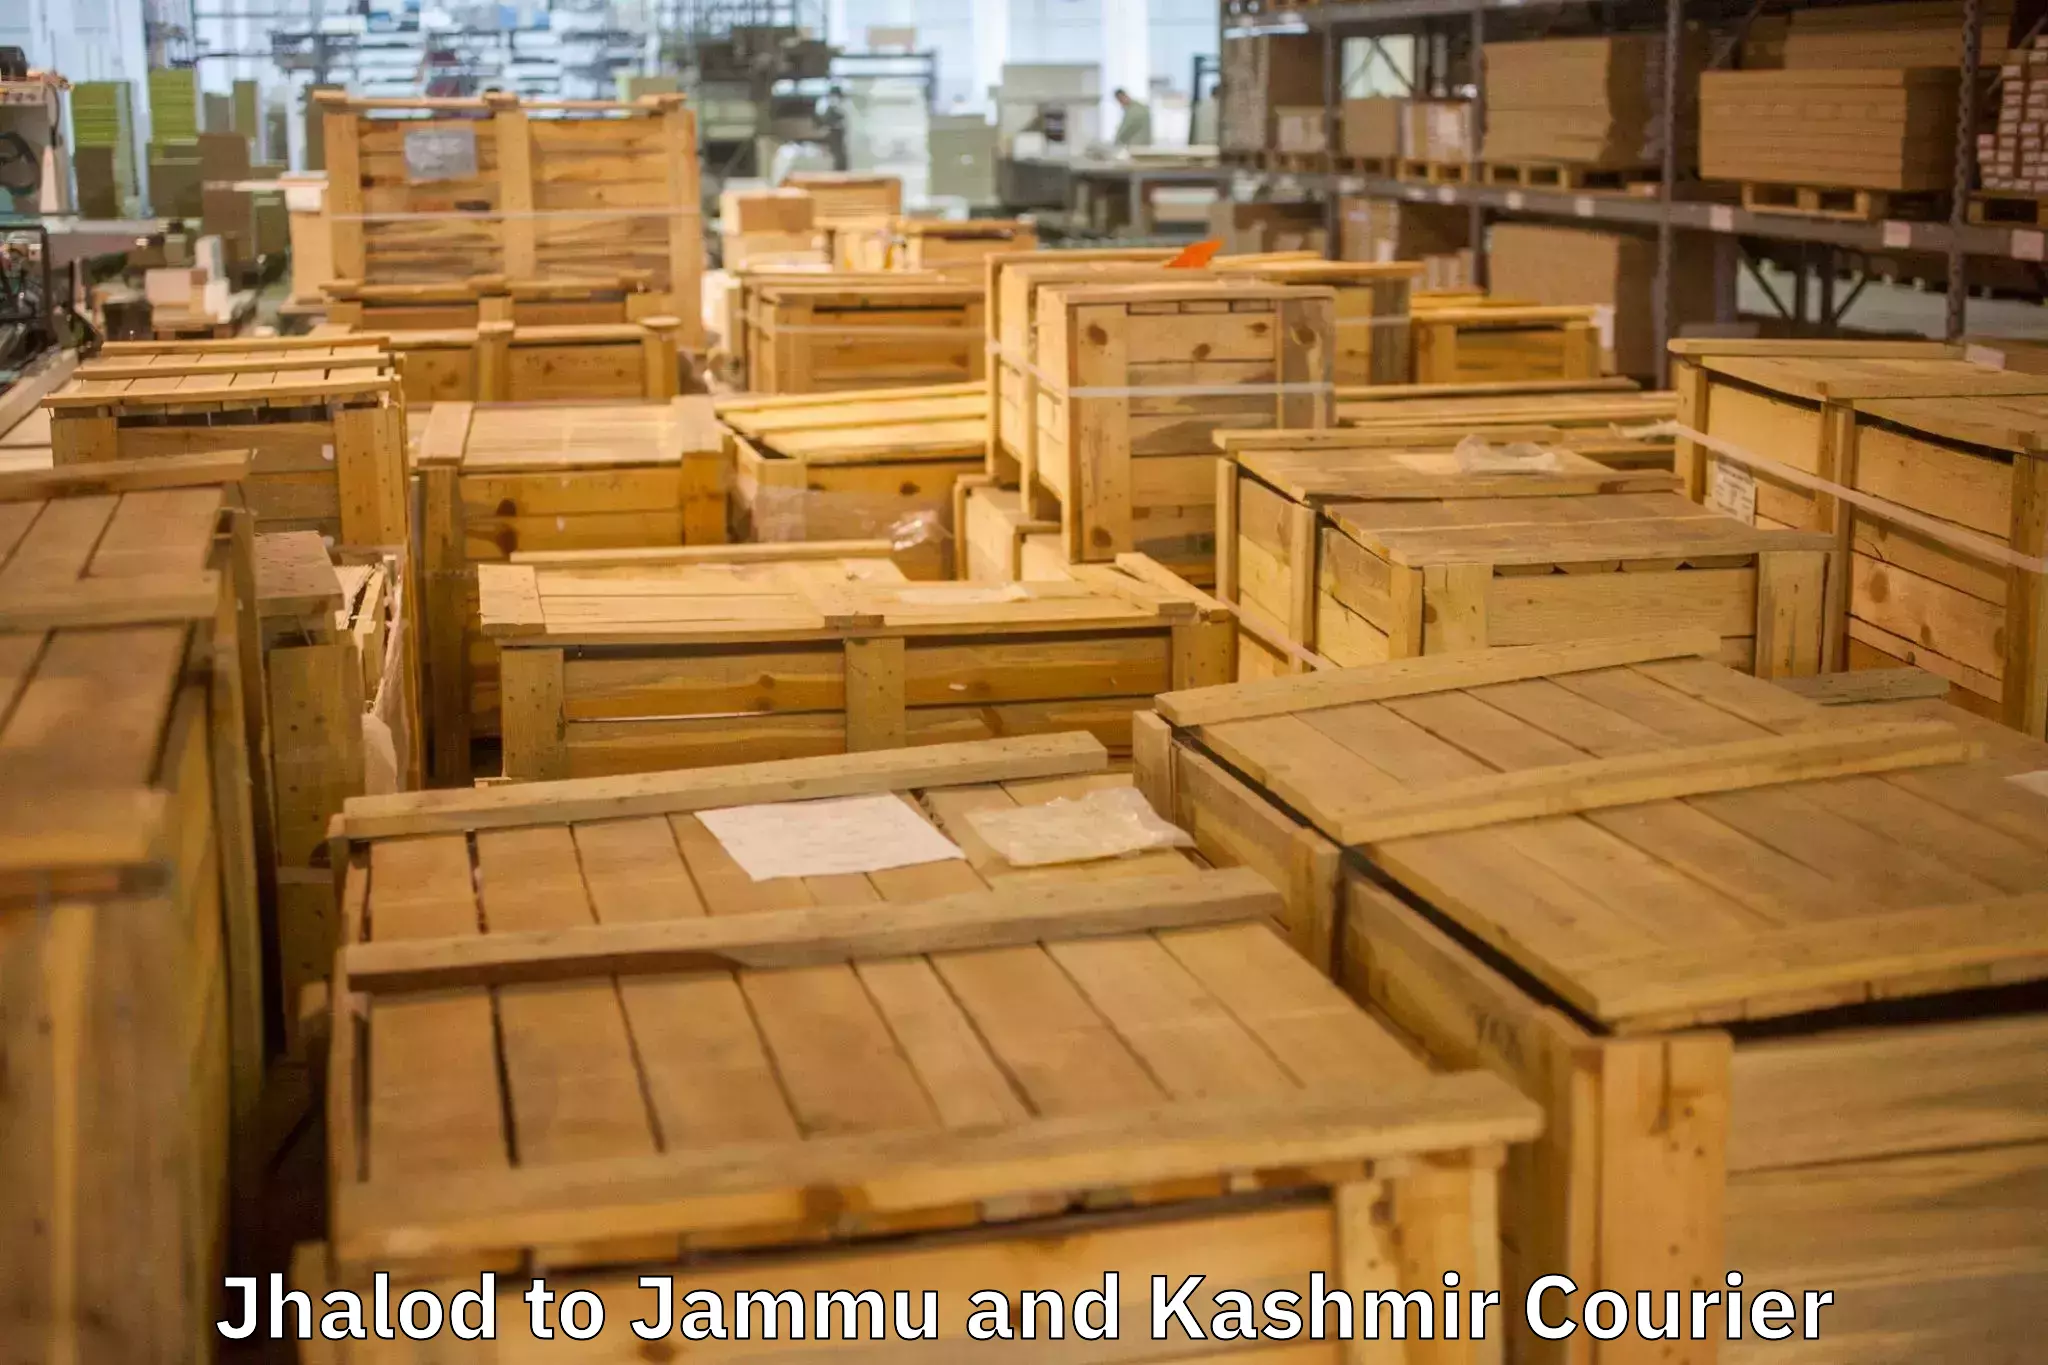 Professional movers and packers Jhalod to Srinagar Kashmir